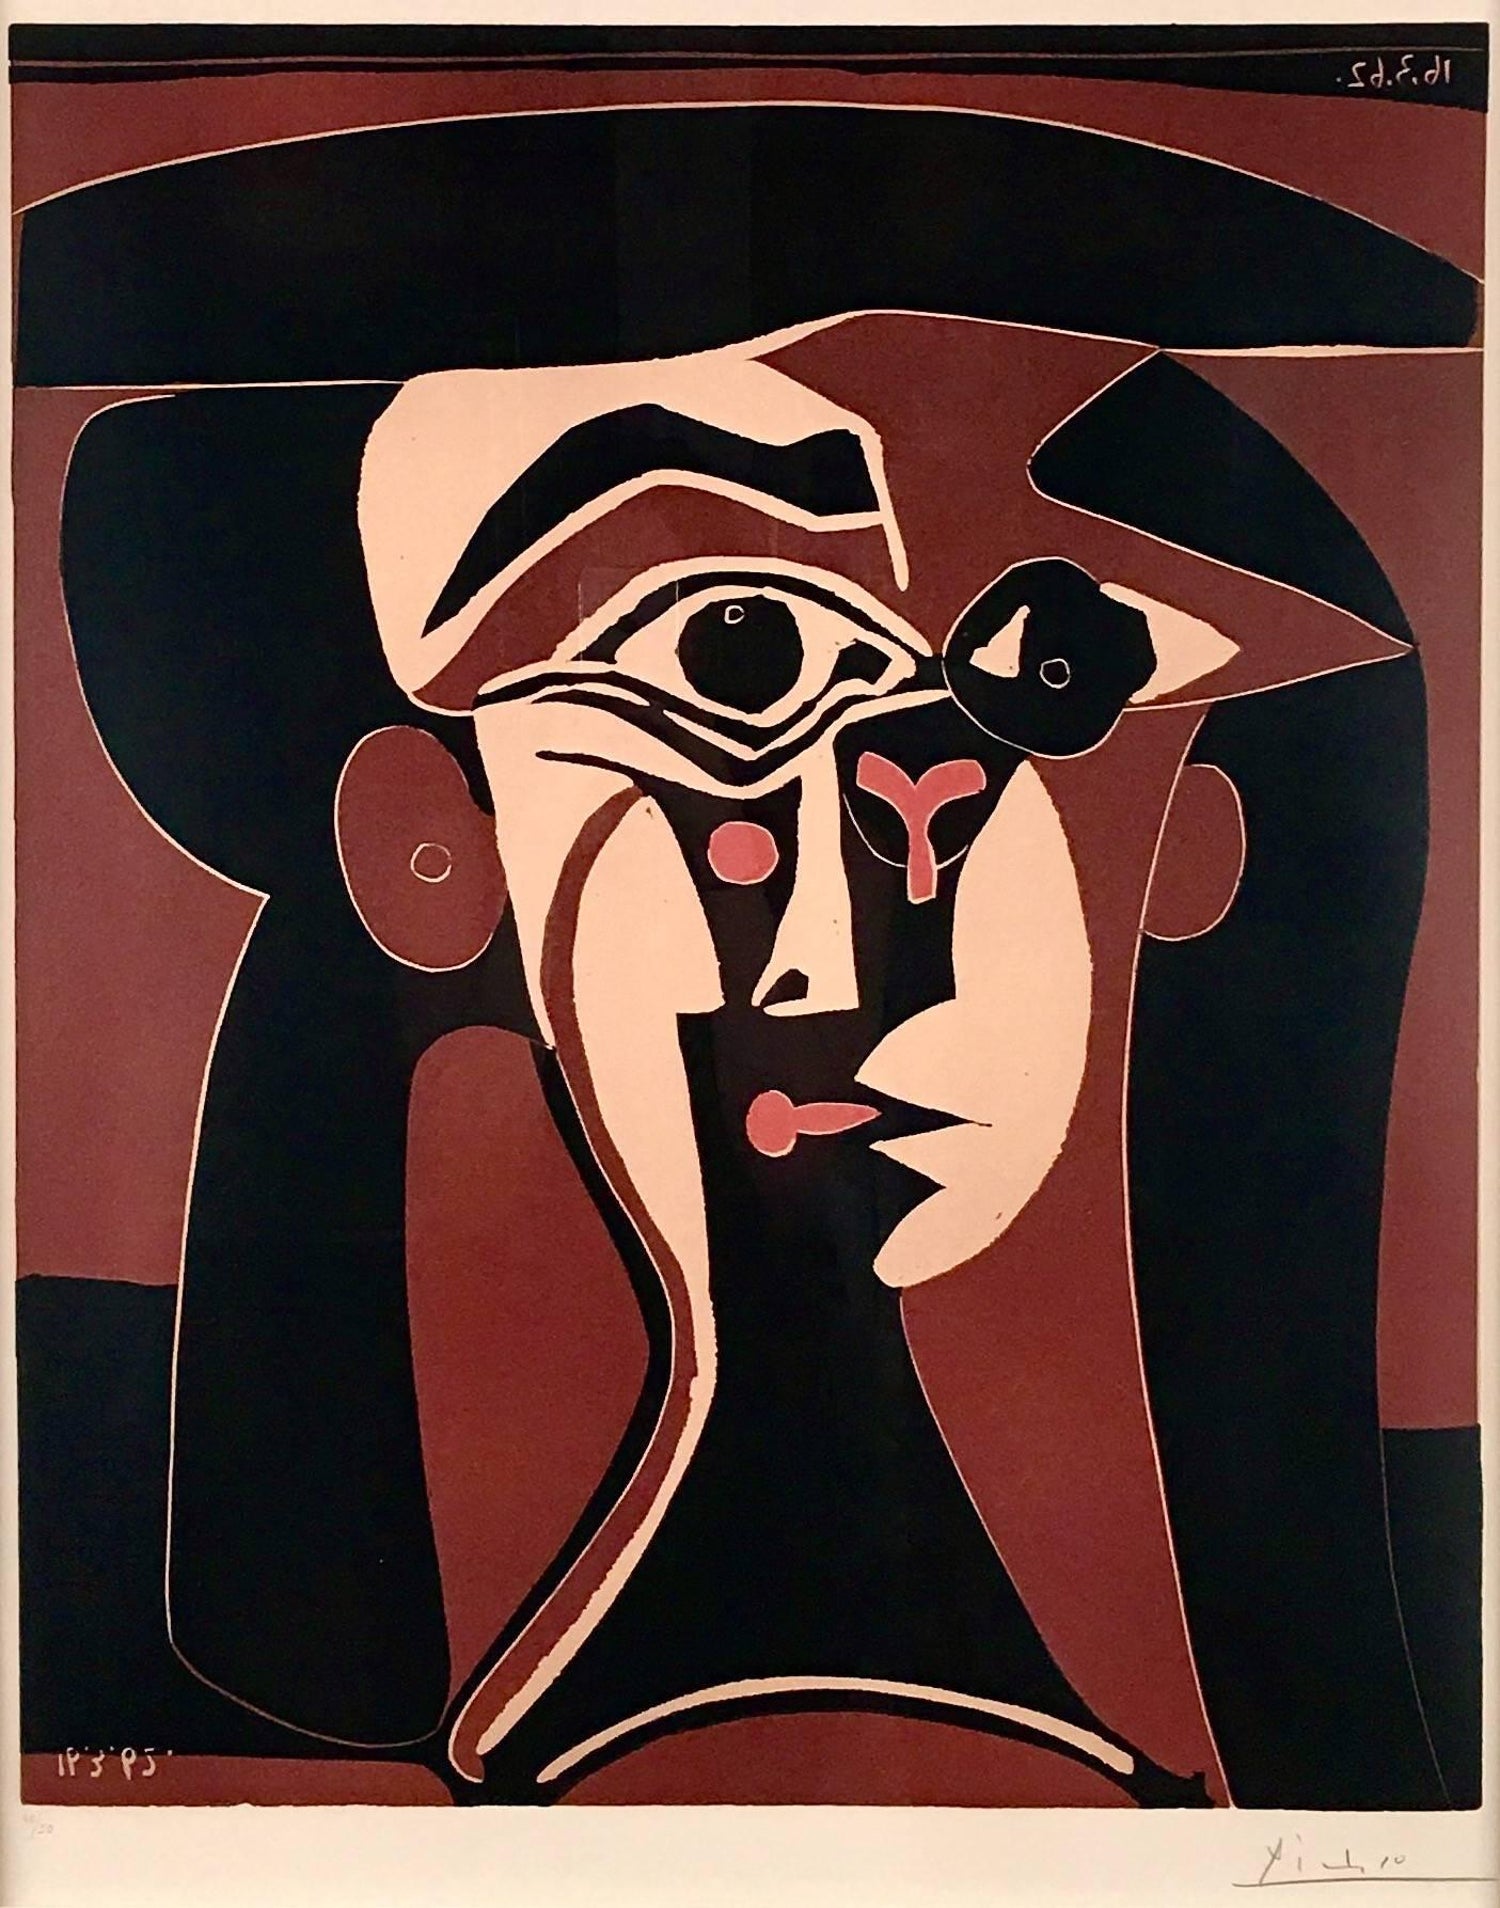 Pablo Picasso - Pablo Picasso, "The Woman with Hair Net, original lithograph, hand signed For Sale at 1stDibs